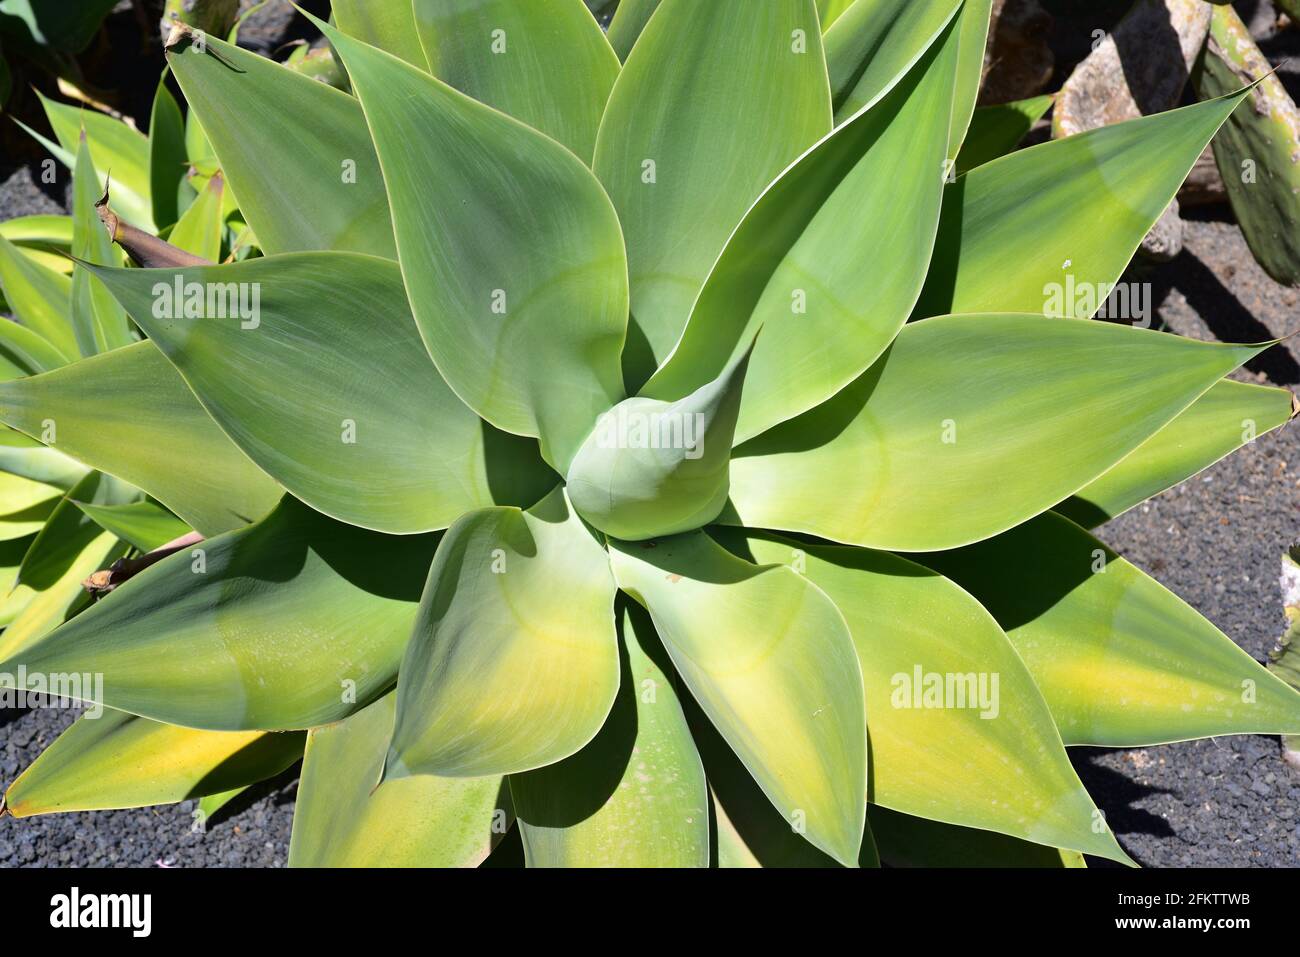 Foxtail or swan's neck agave (Agave attenuata) is a succulent ornamental plant endemic to central Mexico. Rosette. Stock Photo